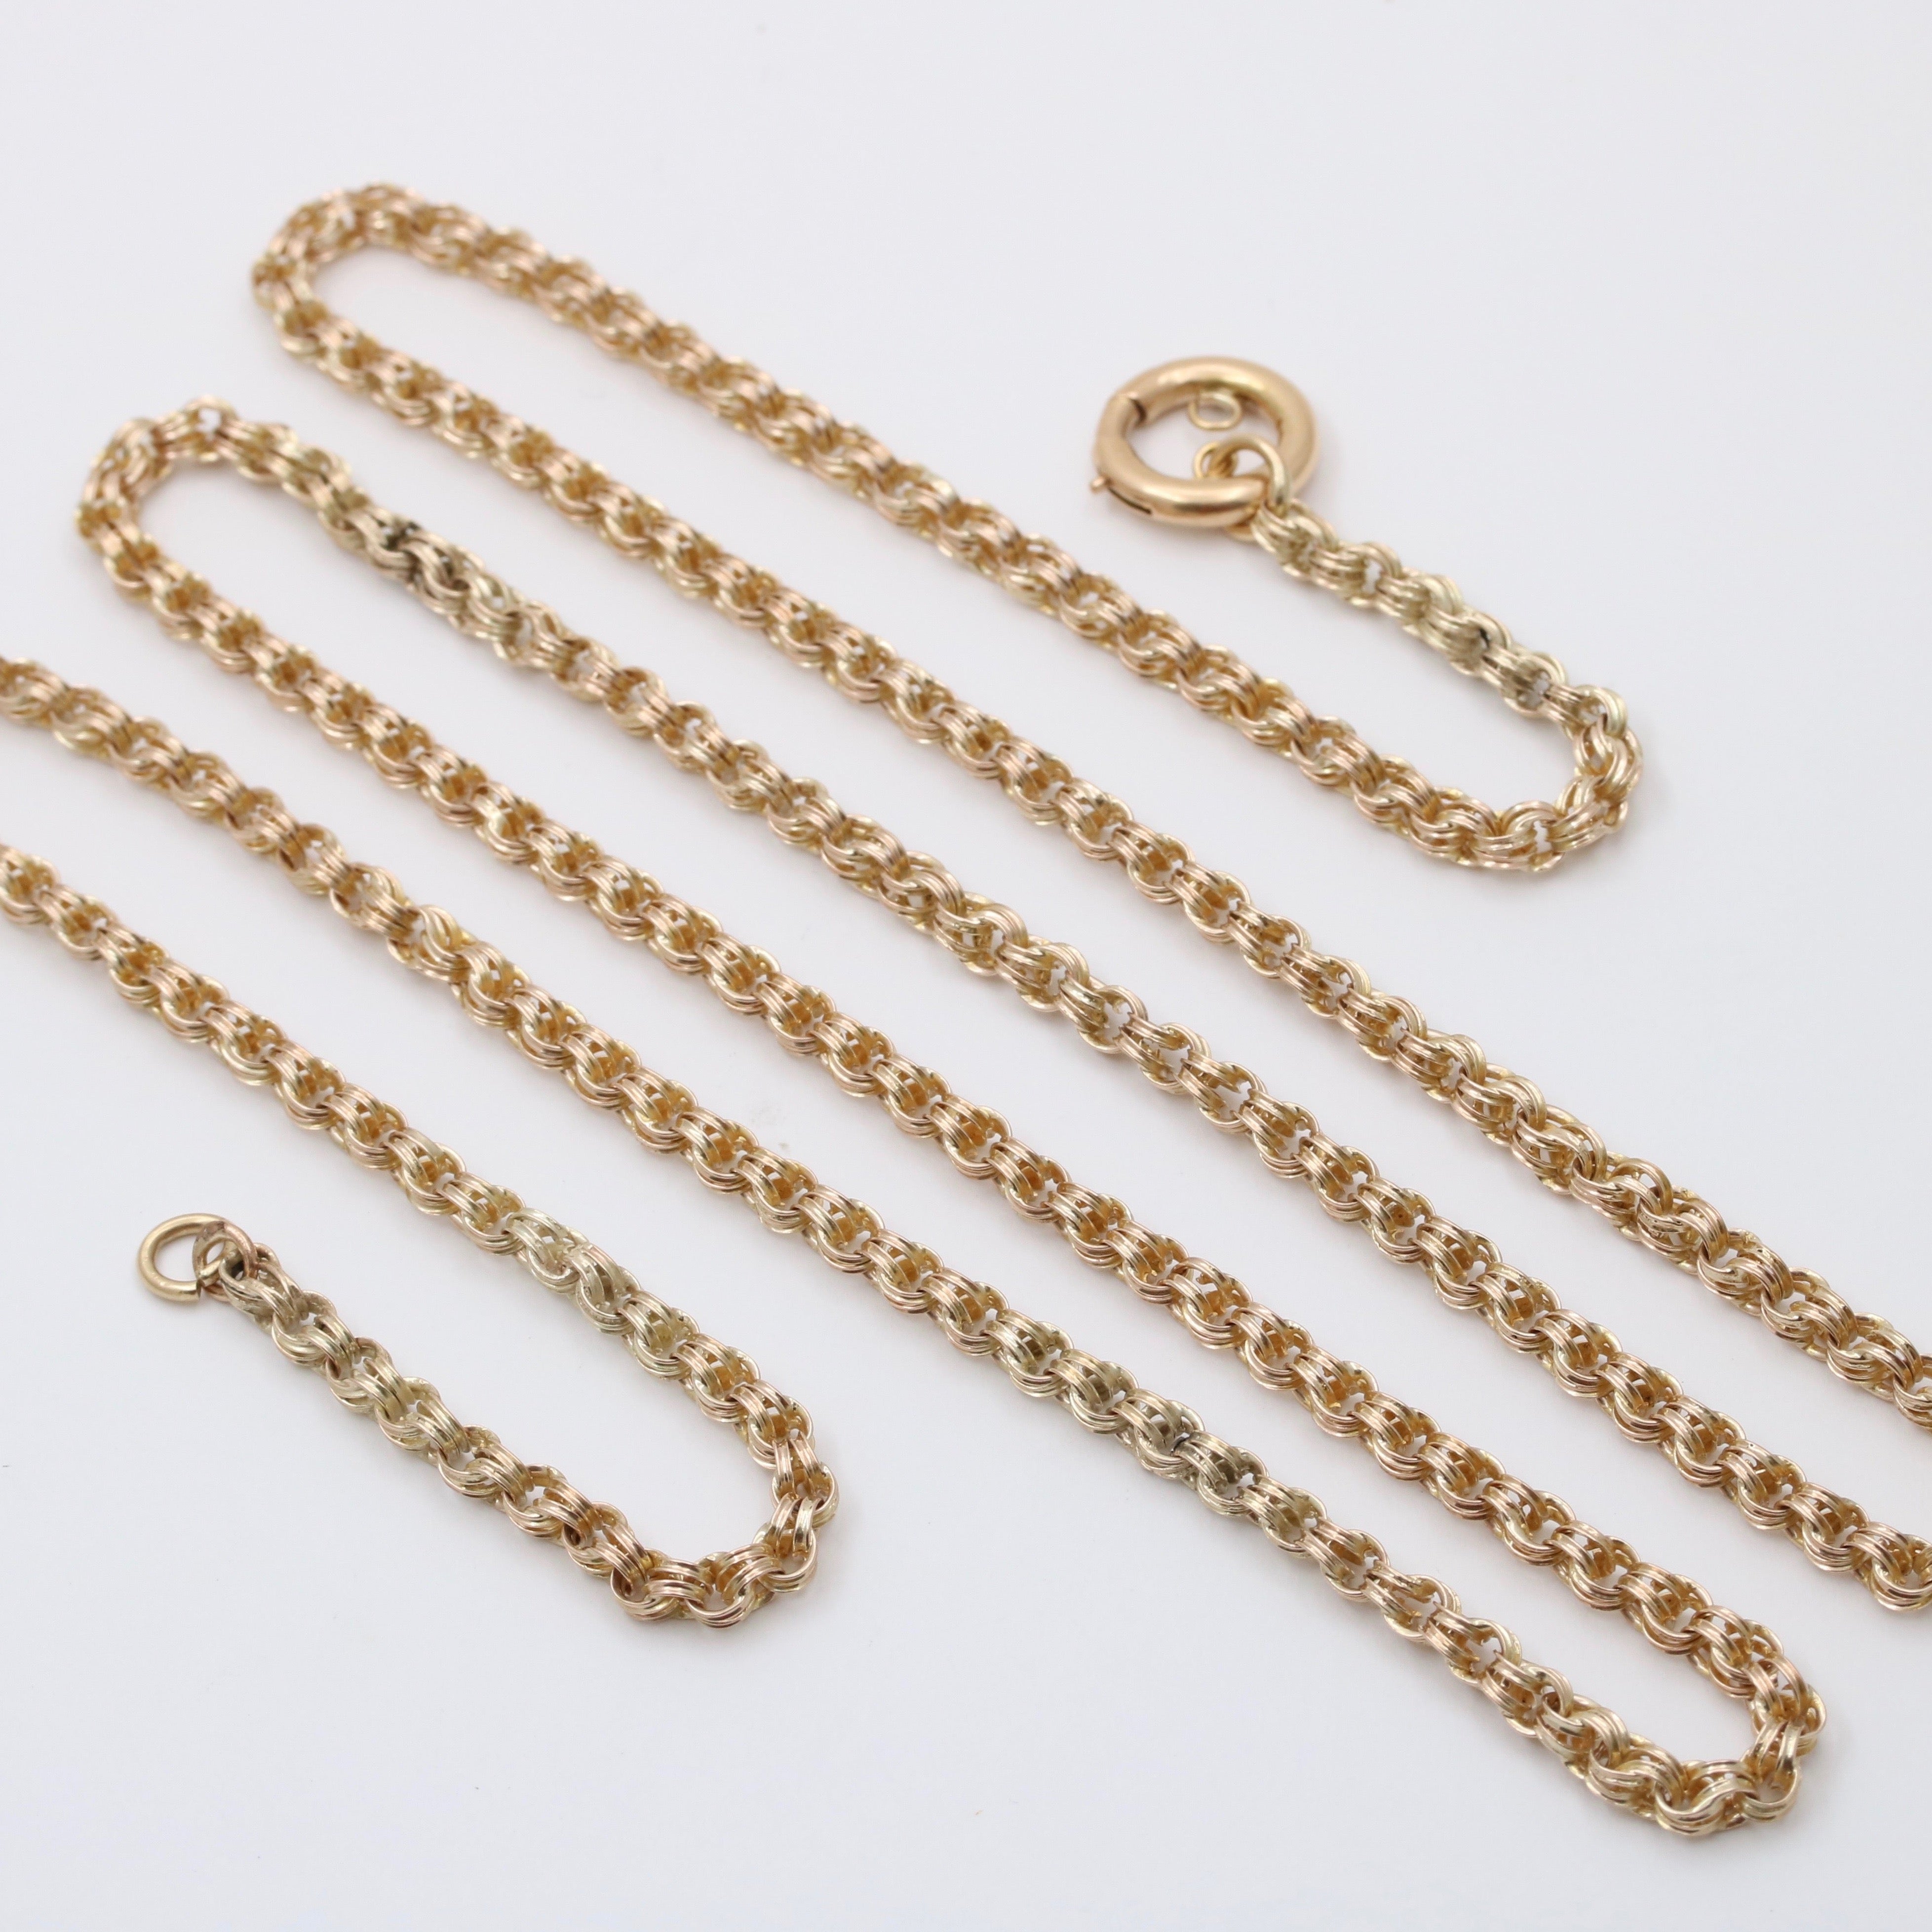 14K Solid Yellow Gold Cable Link Chain / Necklace Thin Dainty Necklace,  Layered Stackable Necklace, Minimalist Look, Everyday Gold Chain - Etsy